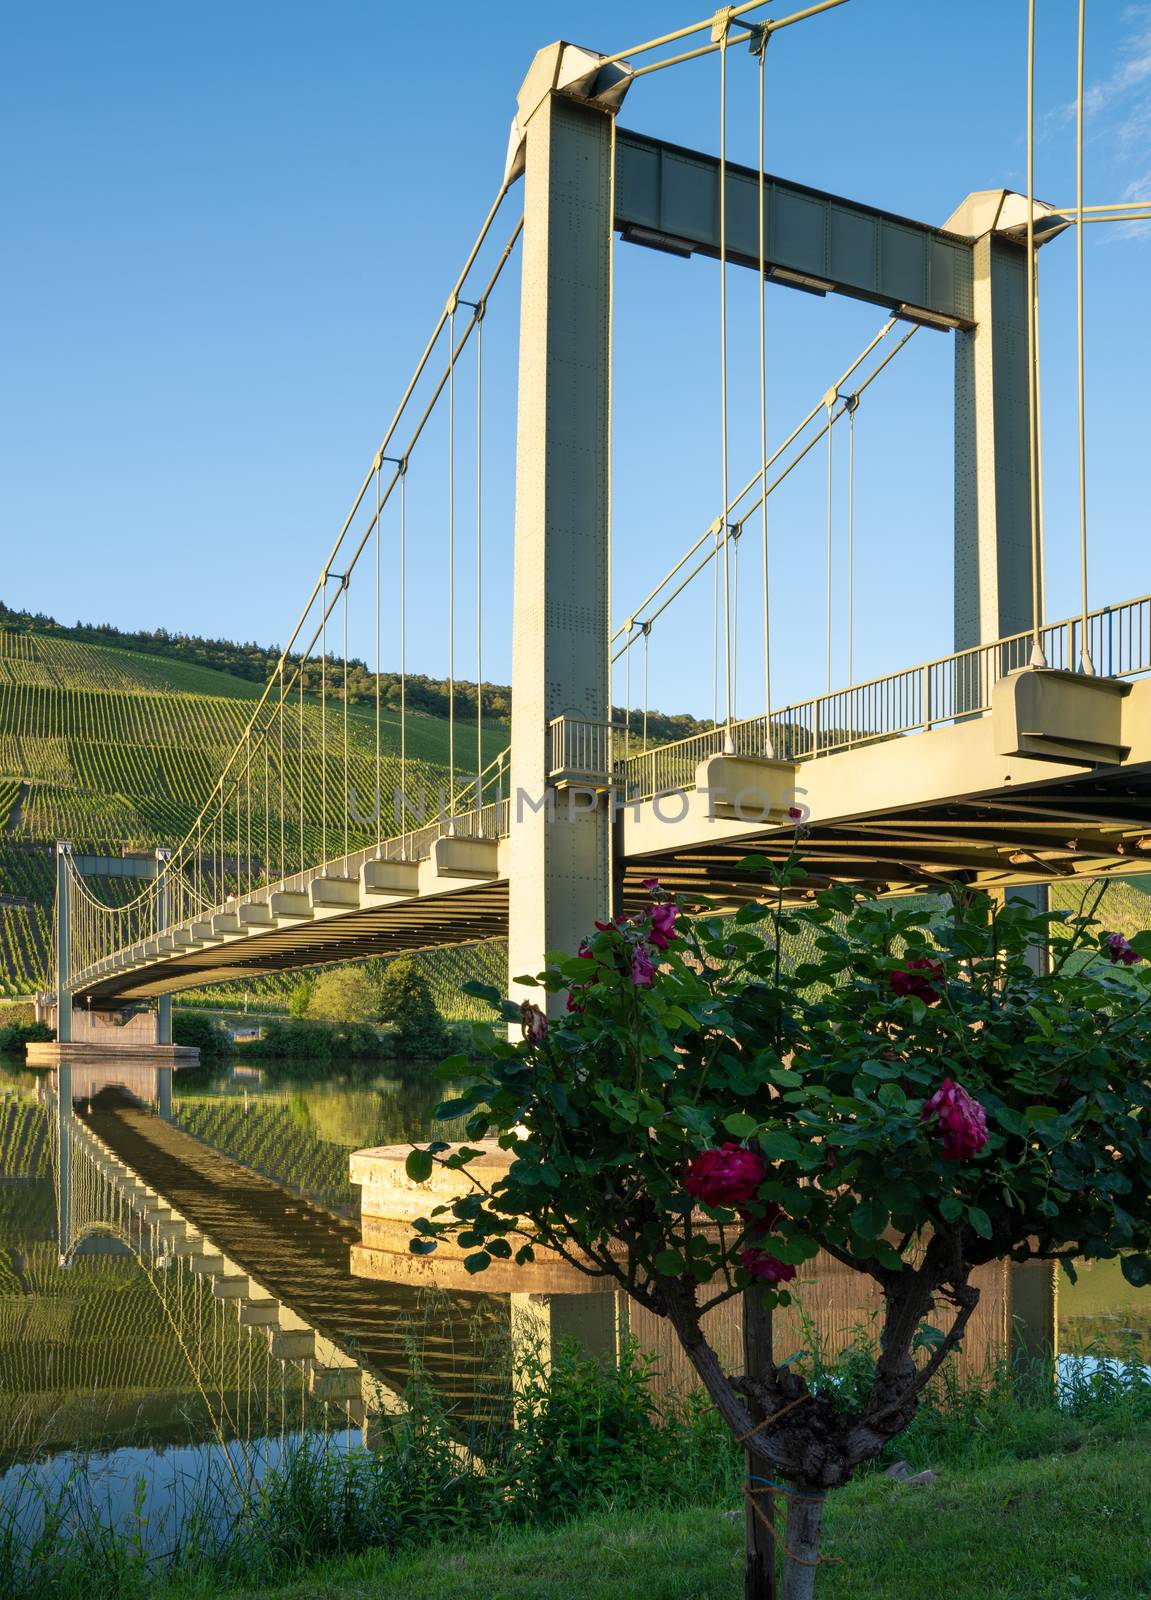 Bridge crossing the Moselle river close to Wehlen, Germany 